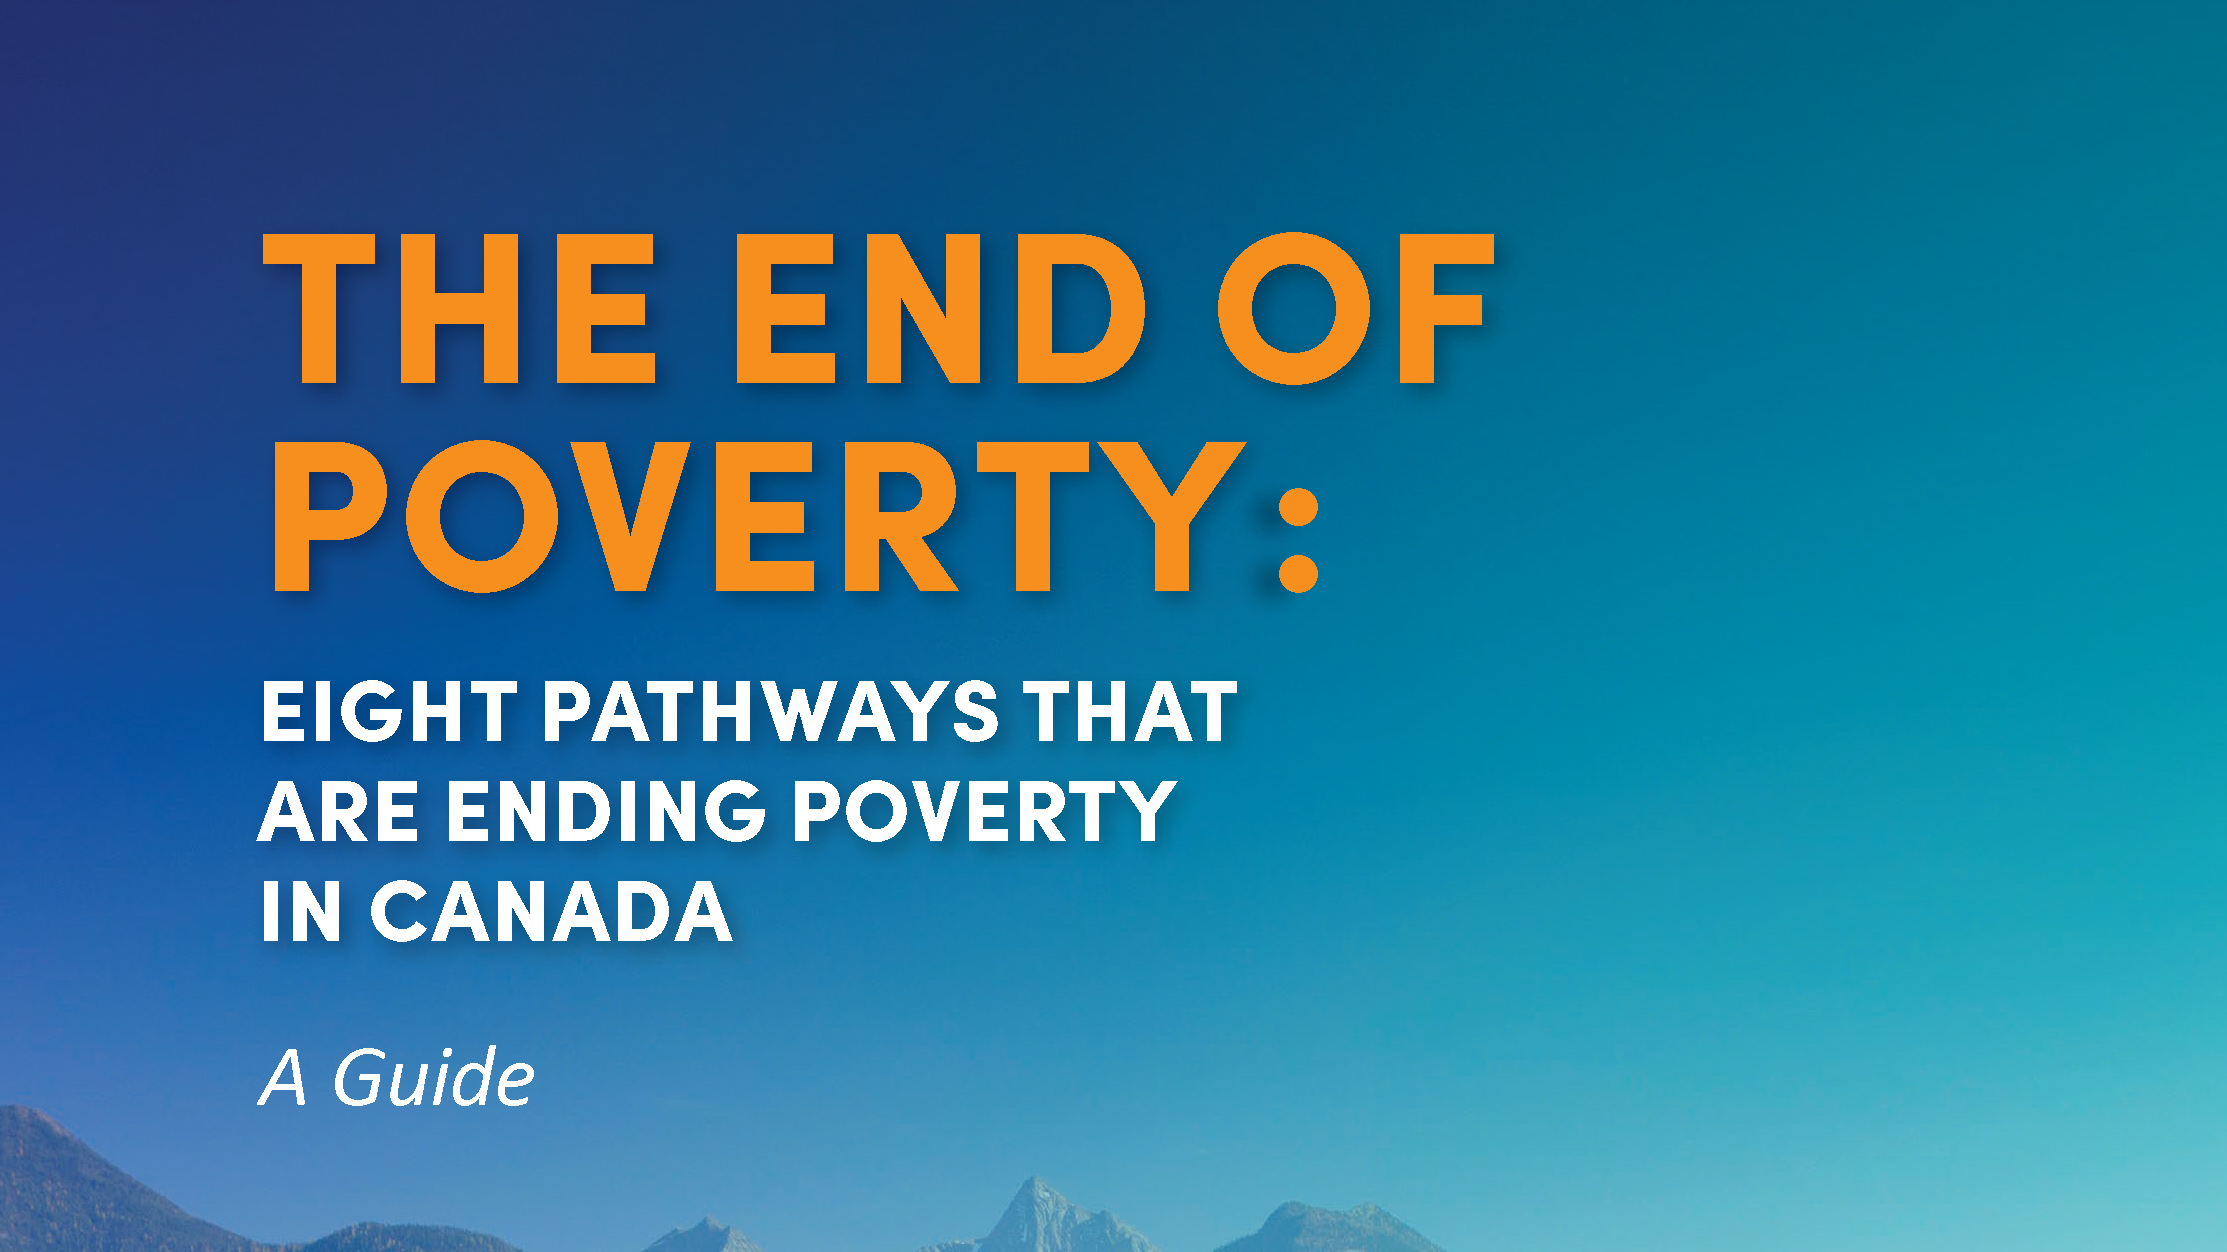 The End of Poverty: Eight Pathways That Are Ending Poverty in Canada